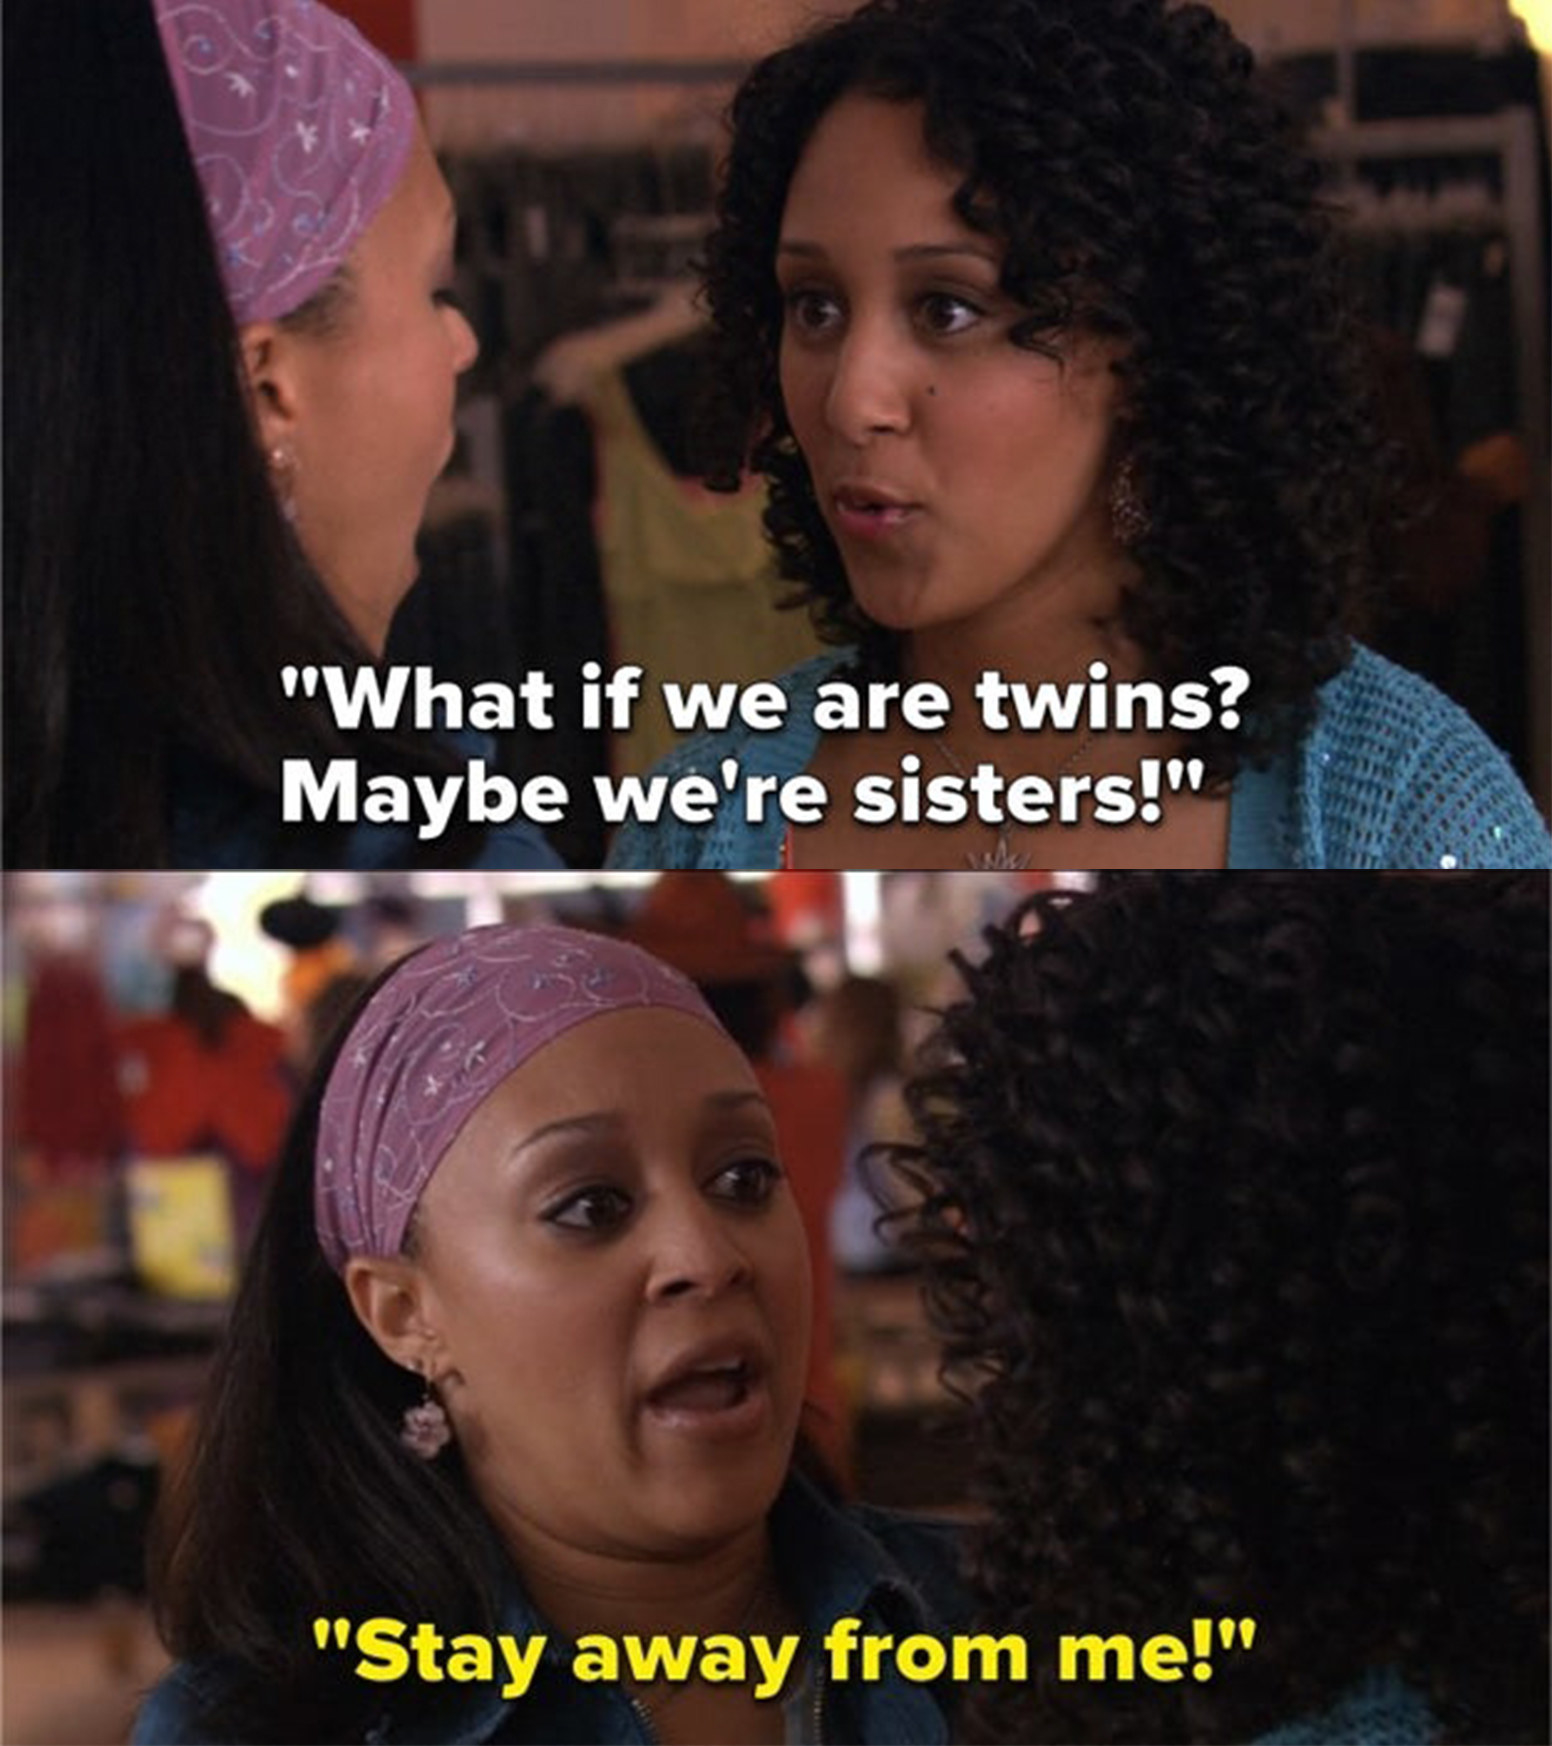 Top: Tamera Mowry as Camryn Barnes excitedly questions Tia Mowry as Alex Fielding if they are sisters in &quot;Twitches&quot; Bottom: Tia Mowry as Alex Fielding admonishes Tamera Mowry as Camryn Barnes in &quot;Twitches&quot;